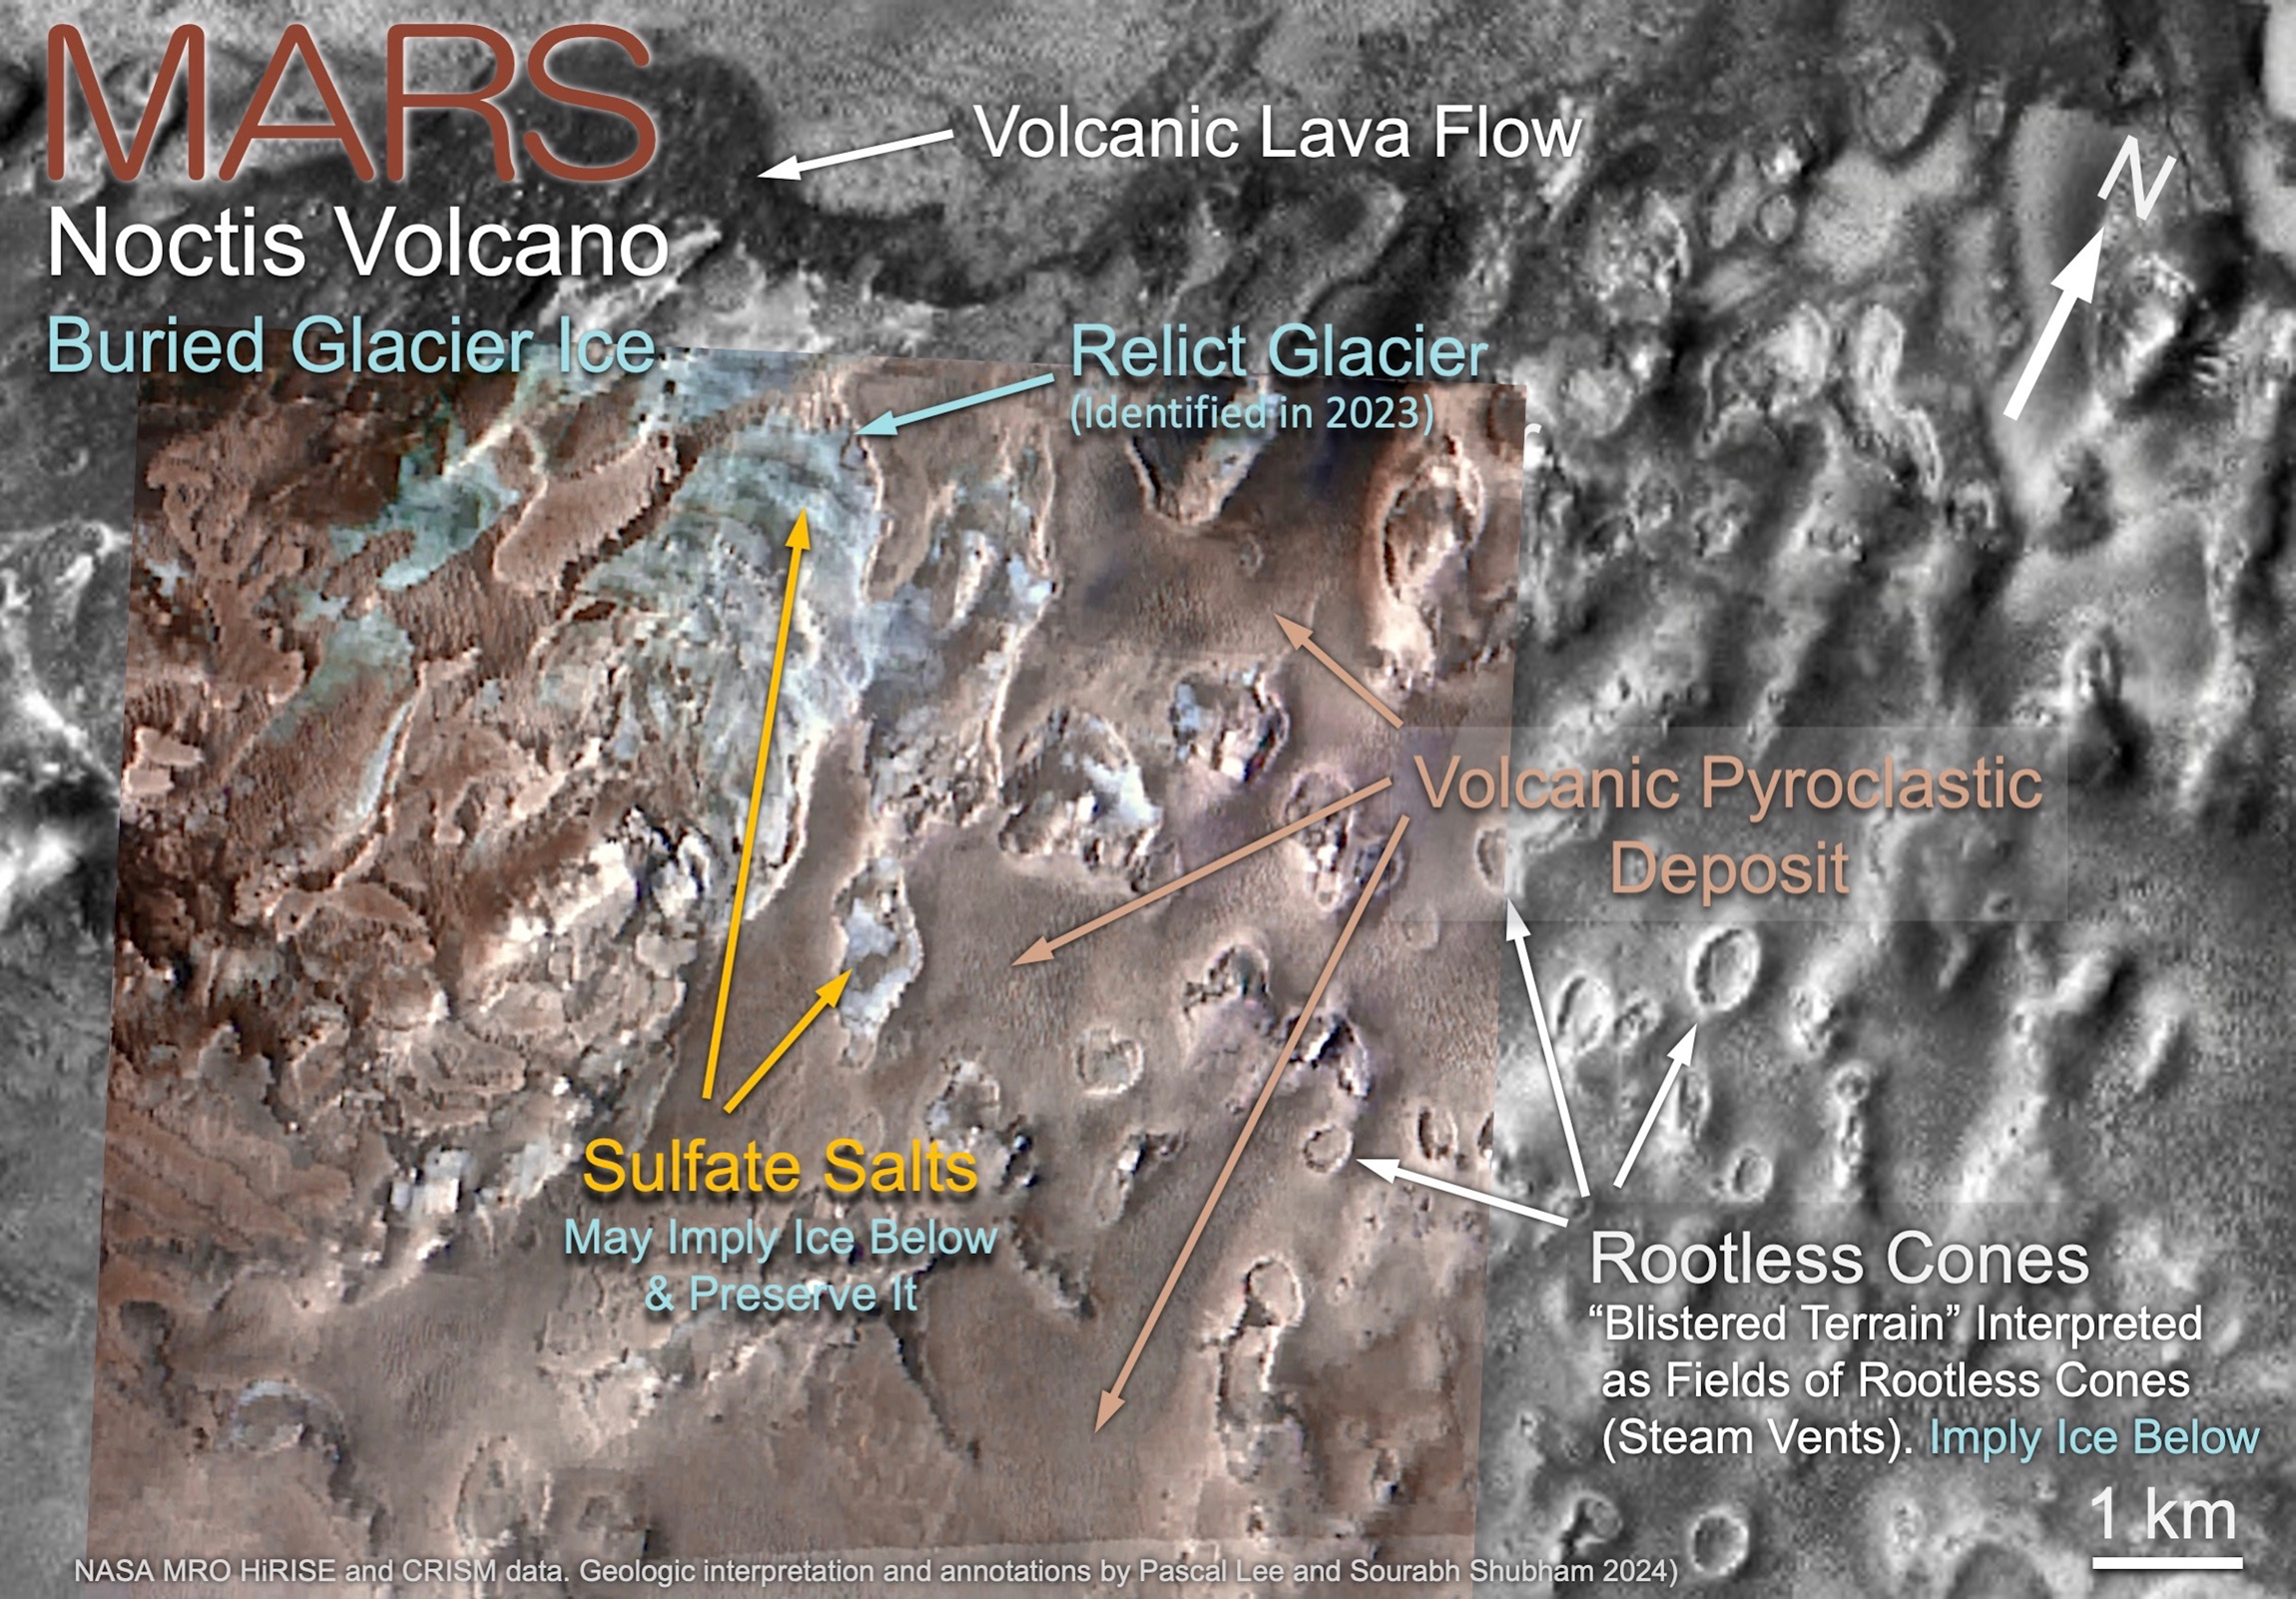 Figure 6: Possible buried glacier ice near the base of the Noctis volcano.